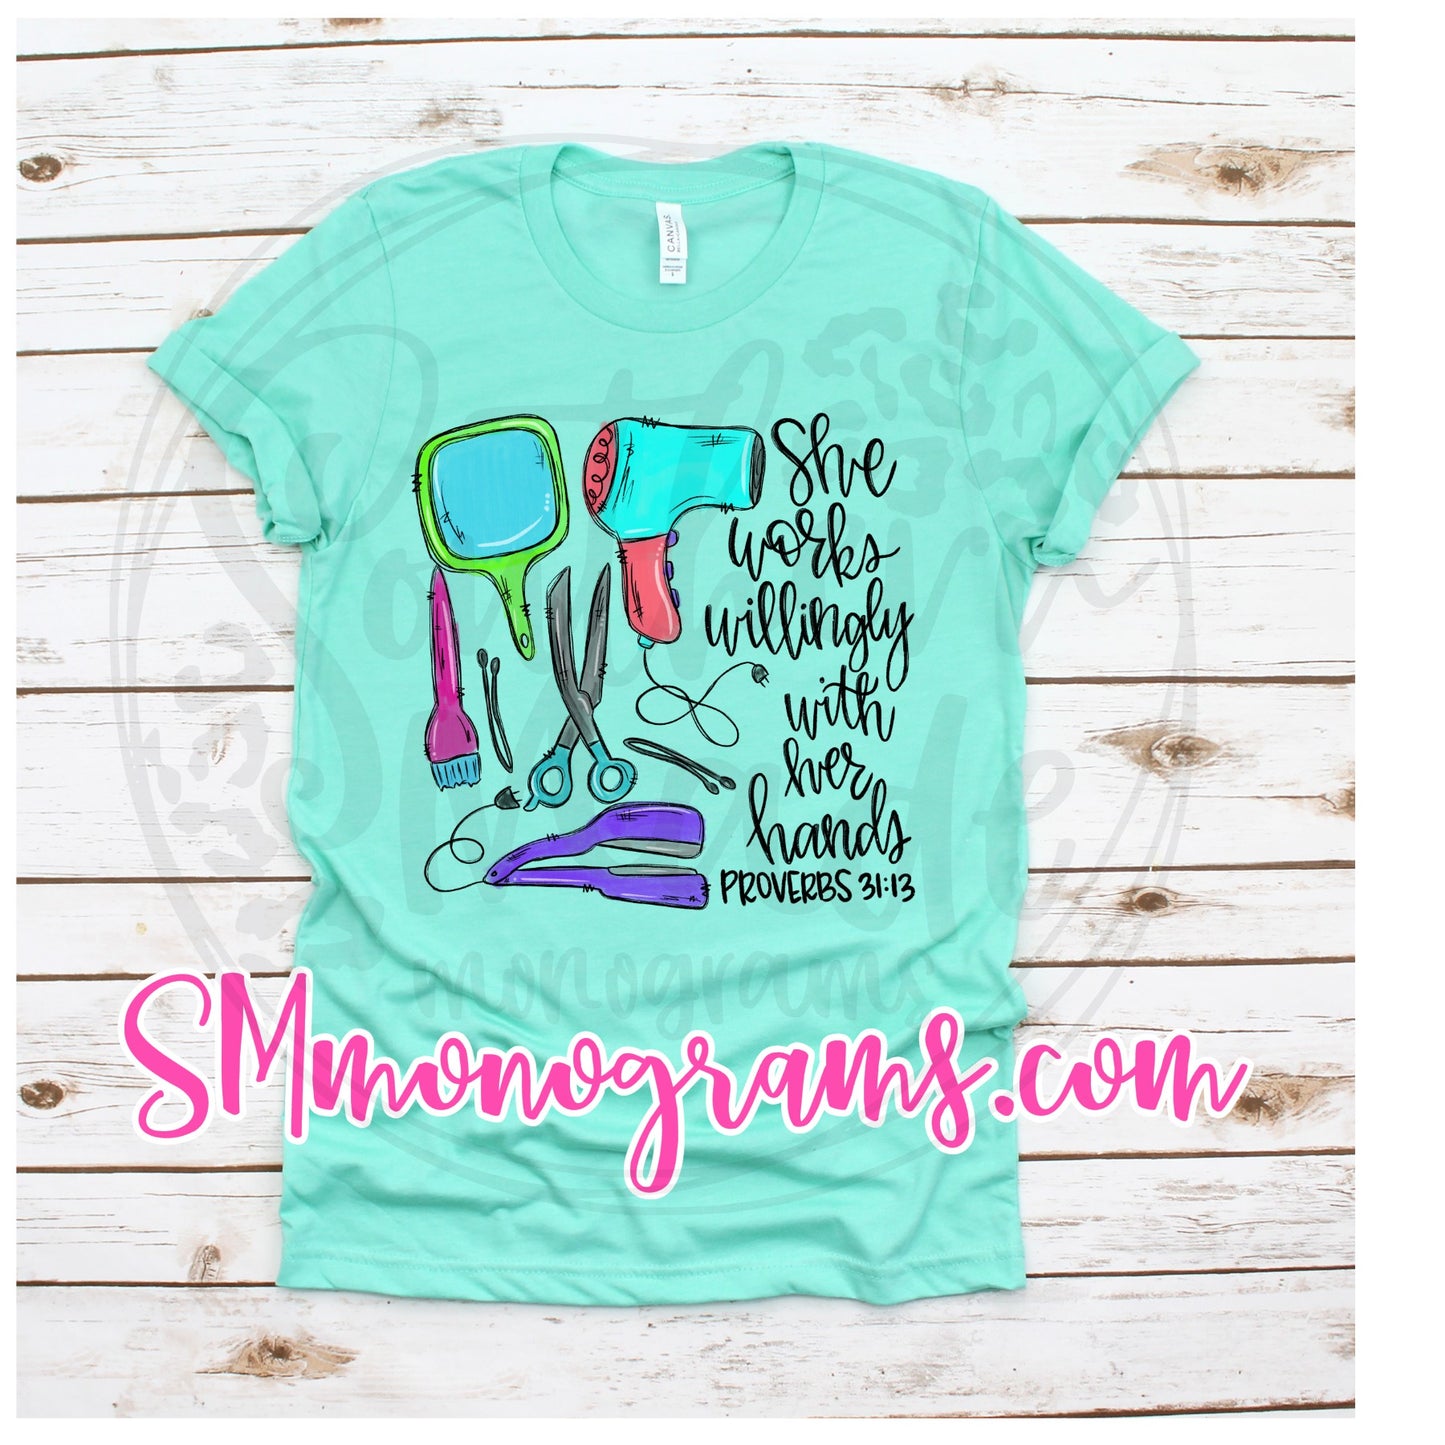 Hair Dresser - She Works Willingly With Her Hands Proverbs 31:13 - Tee, Tank or Raglan